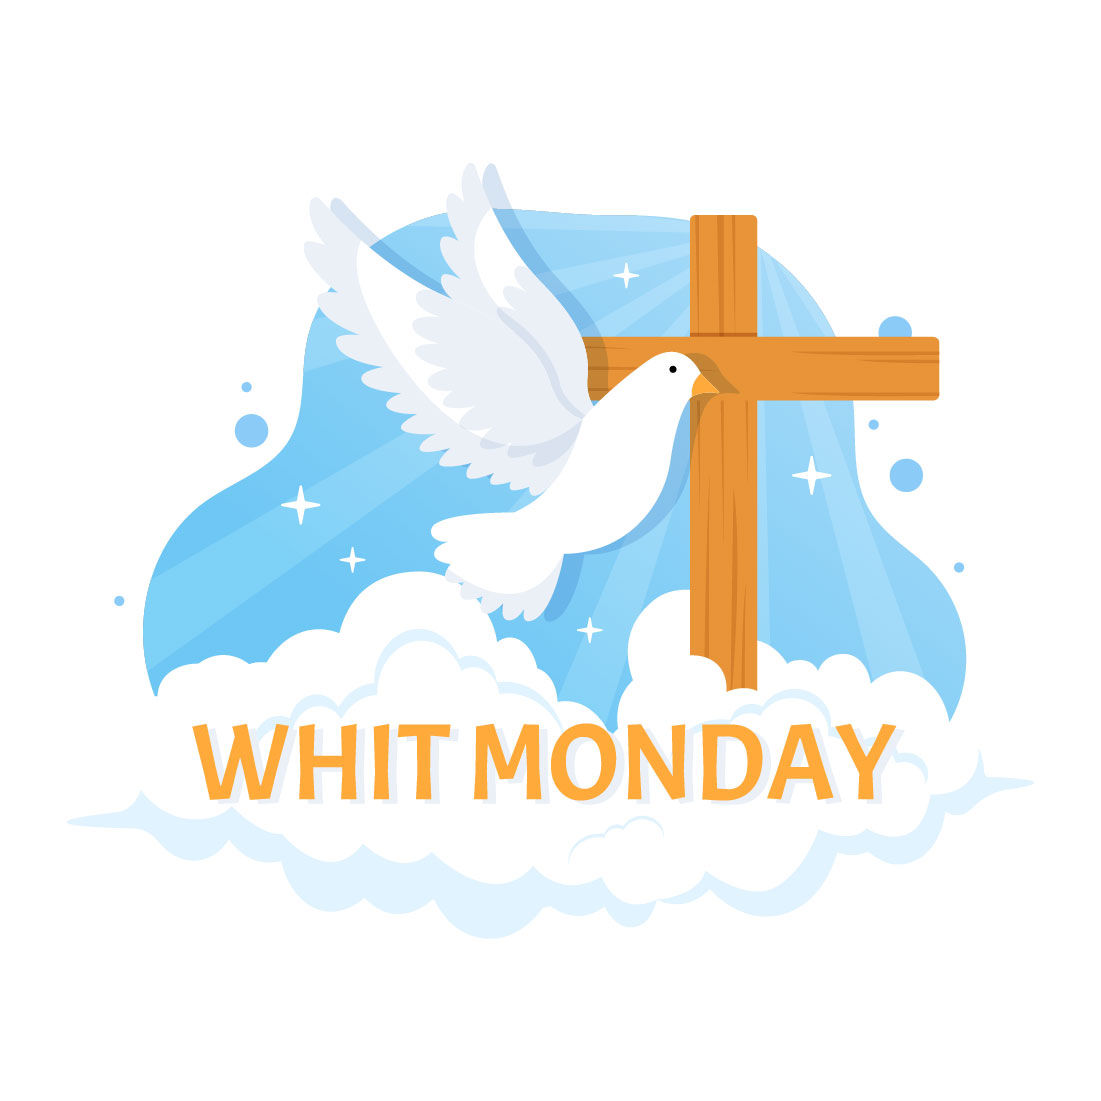 11 Whit Monday Vector Illustration cover image.